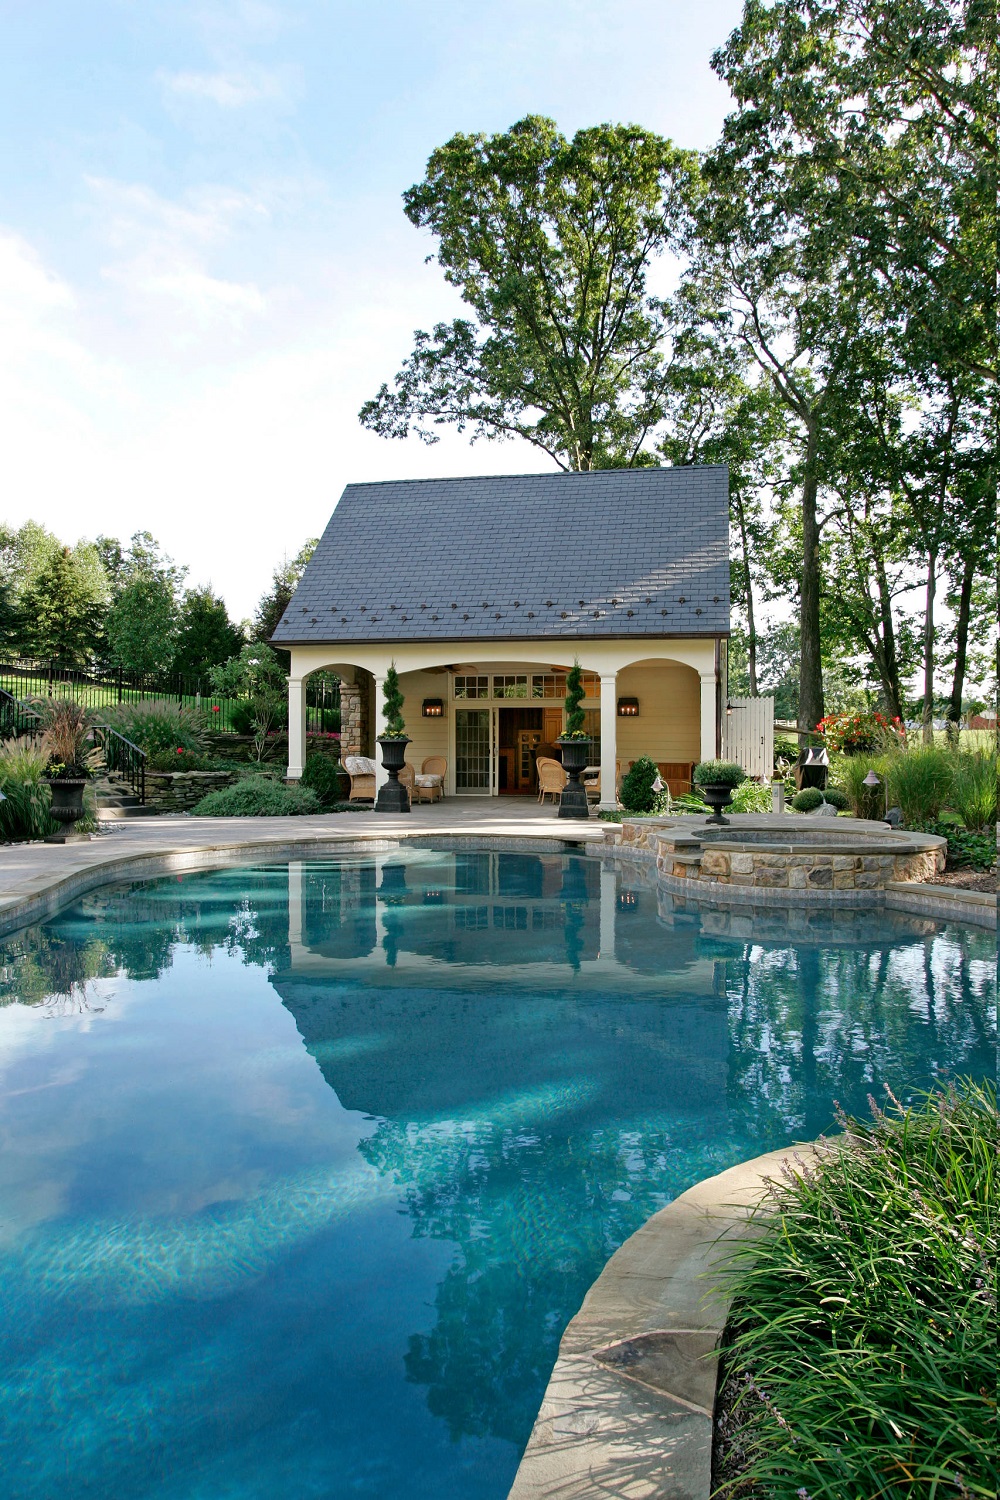 ph8 Pool house ideas and designs to get your decorating juices flowing